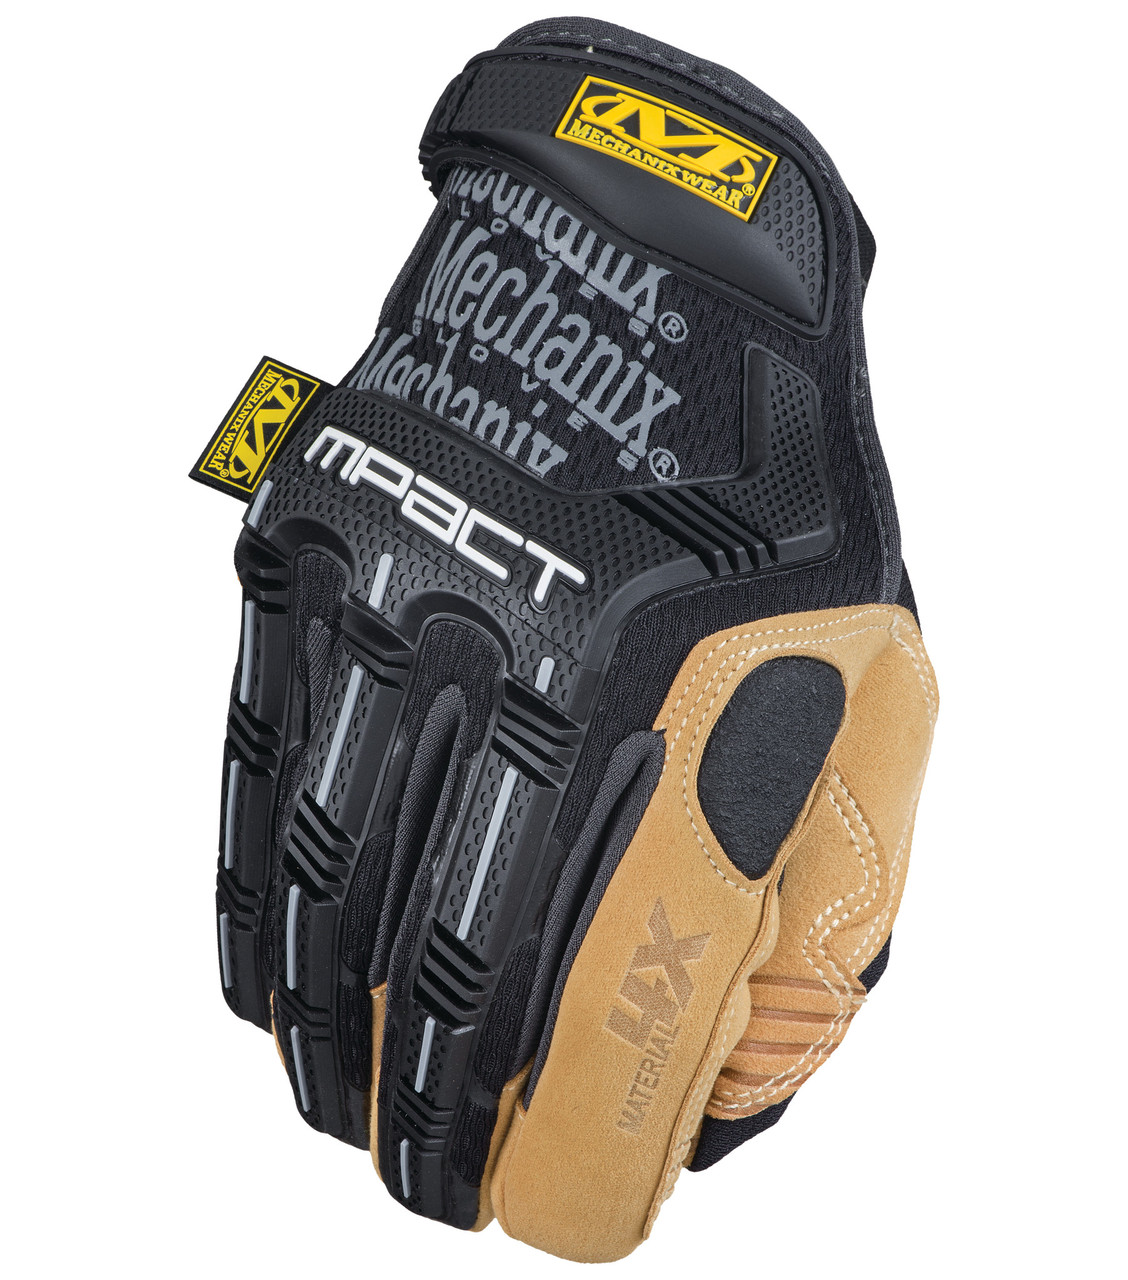 MECHANIX WEAR XX-large Black Synthetic Leather Gloves, (1-Pair)